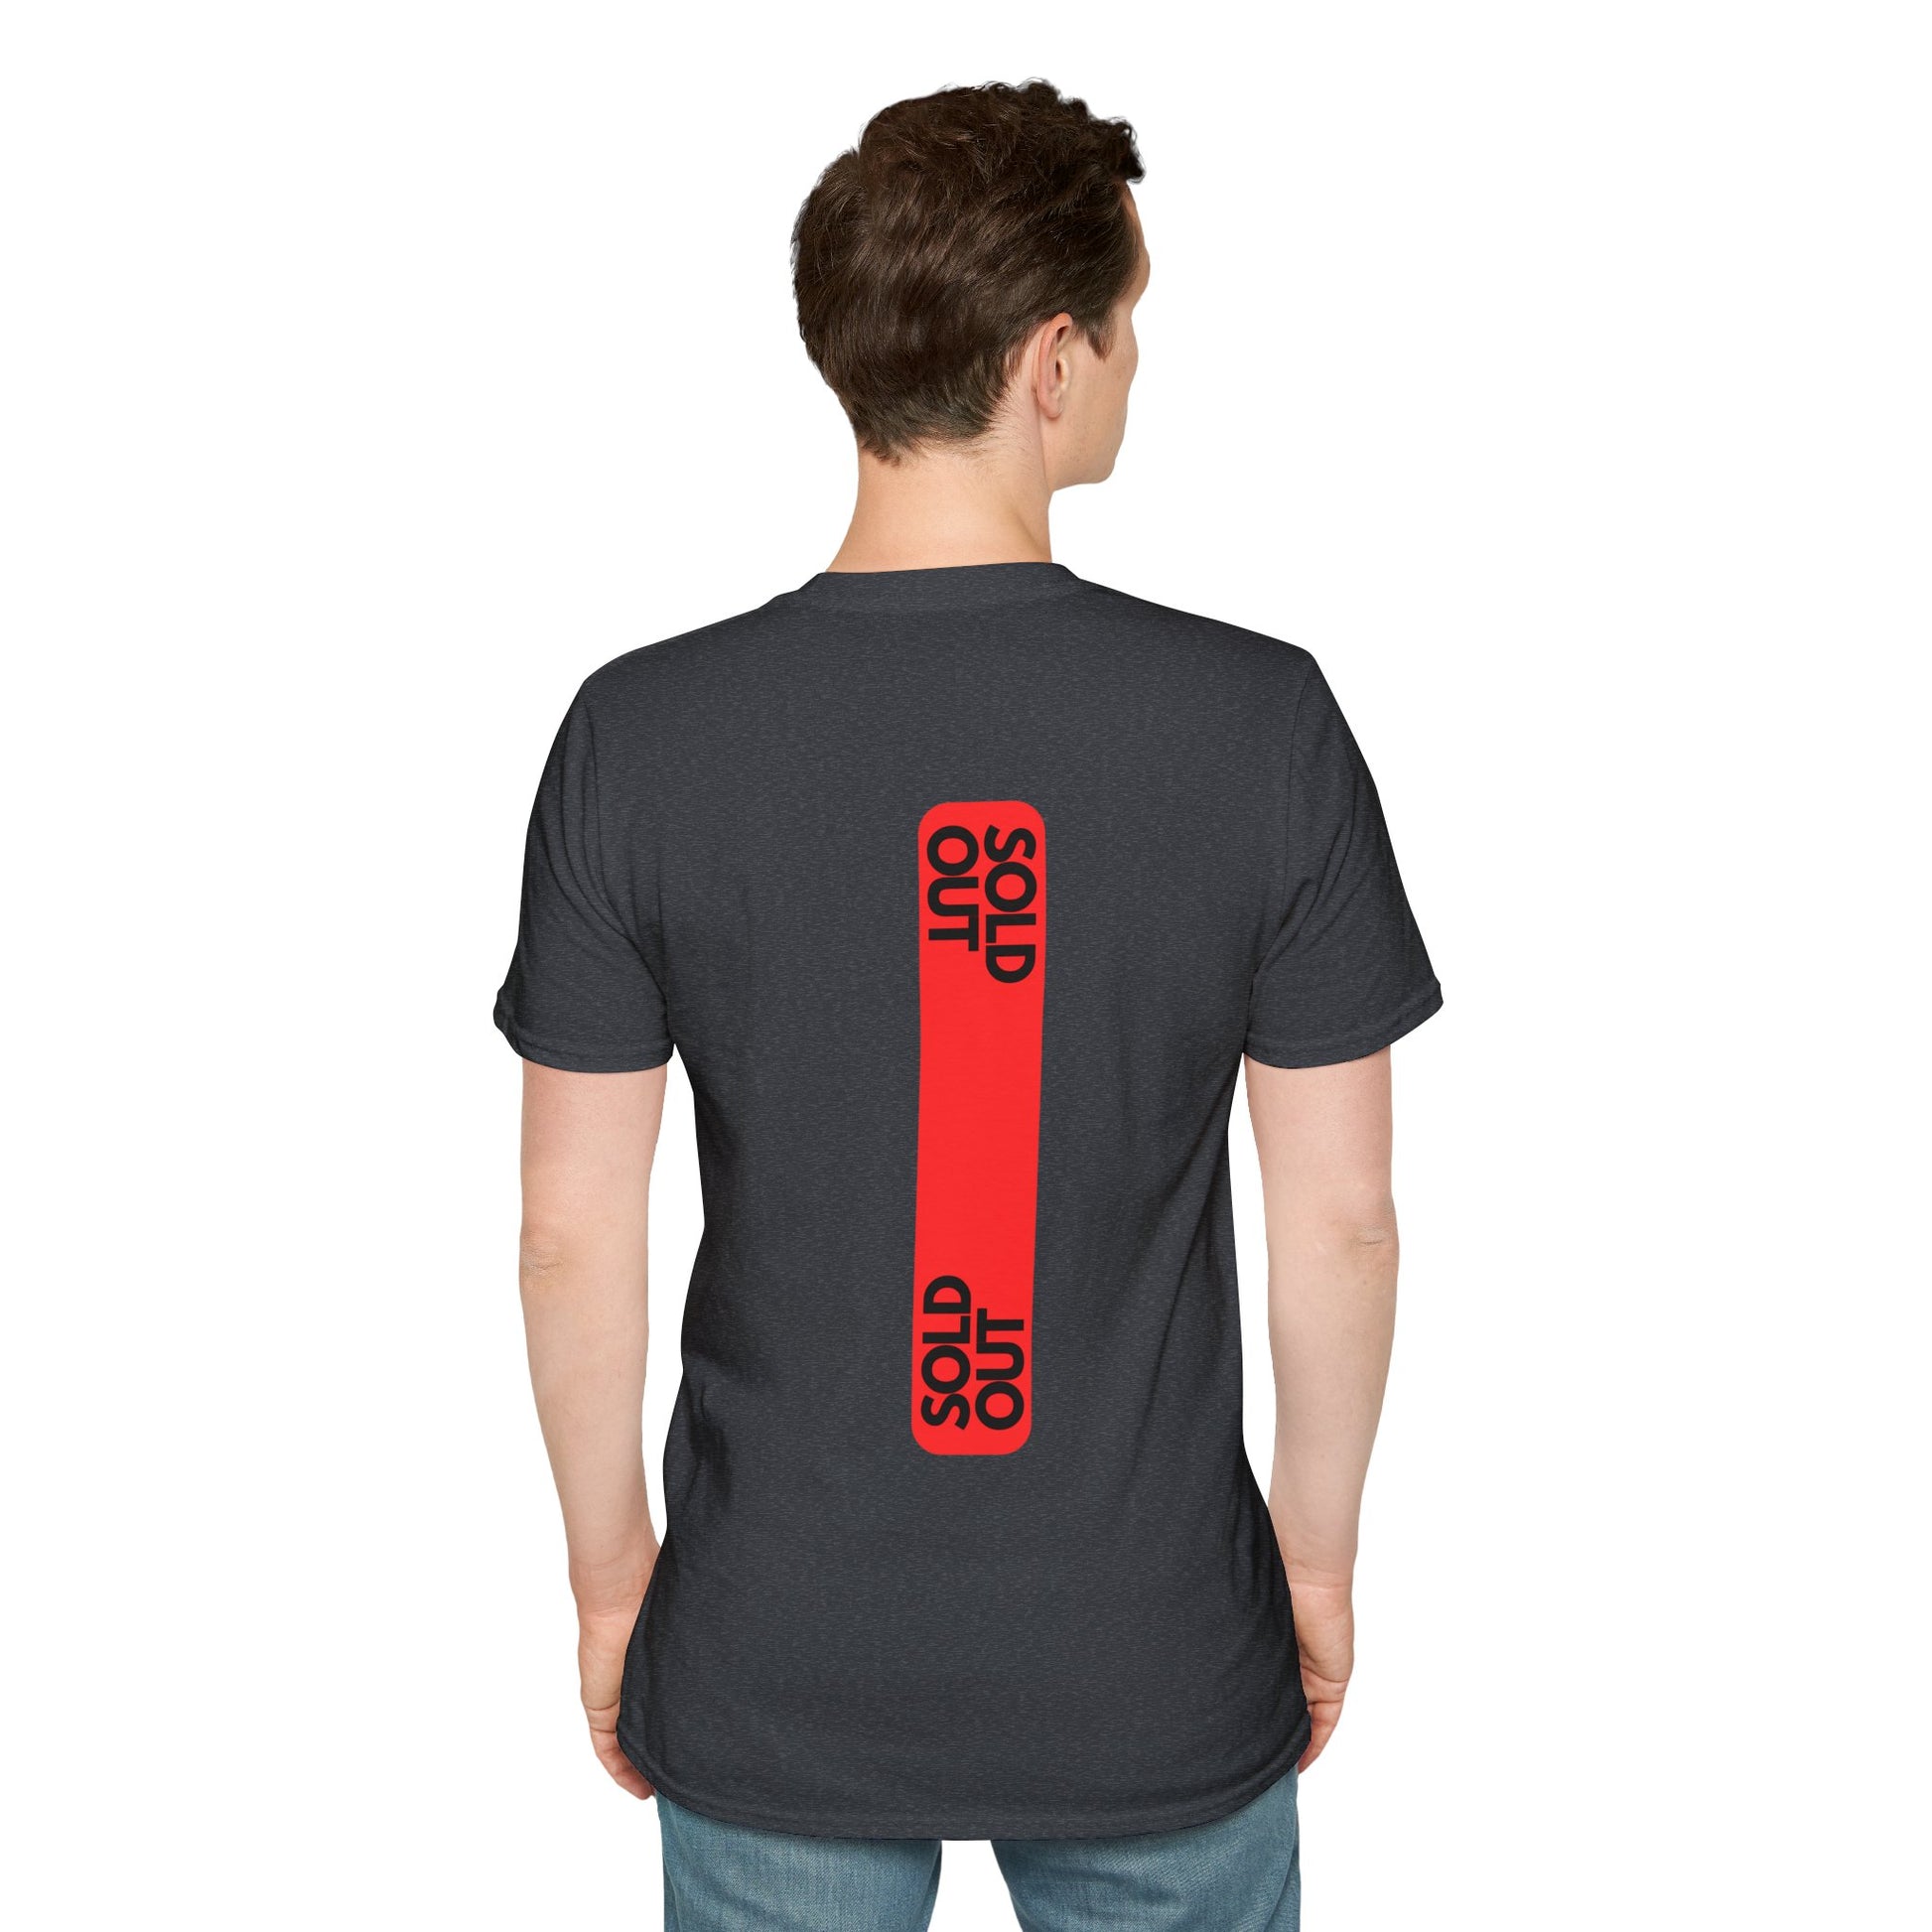 Heather GreyT-shirt with a striking red tag design and the text ‘SOLD OUT’ in bold letters